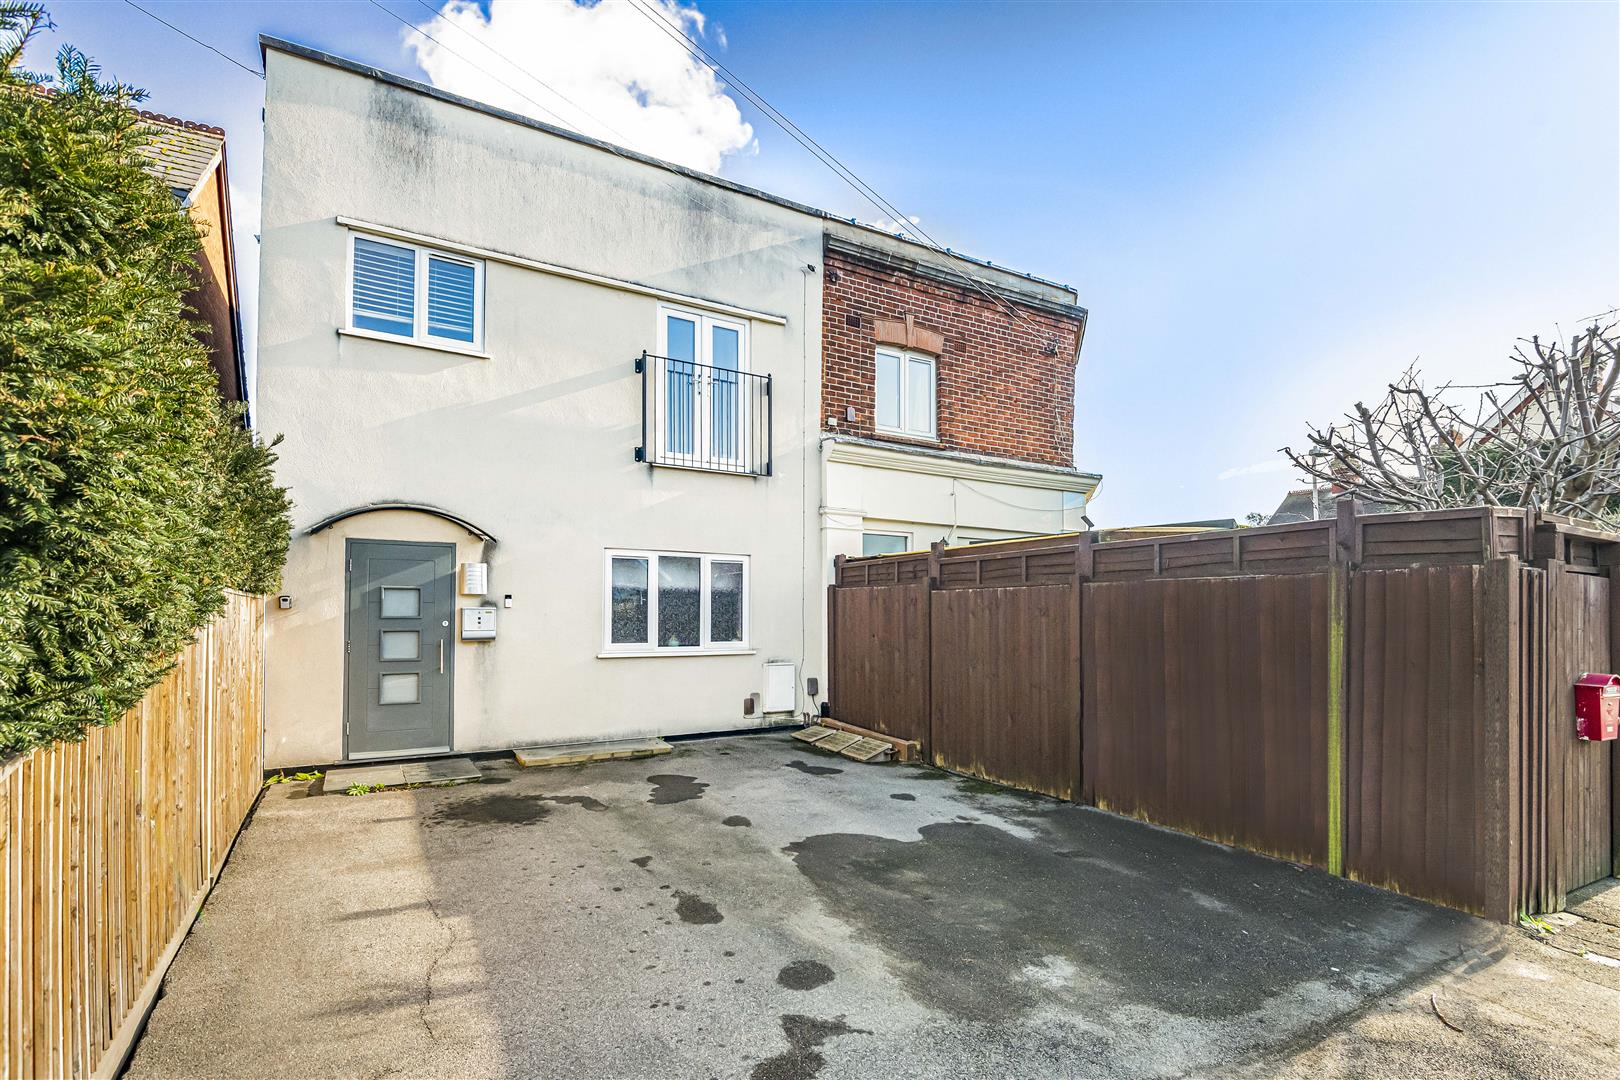 Kidmore Road Caversham Heights Apartment for sale in Reading